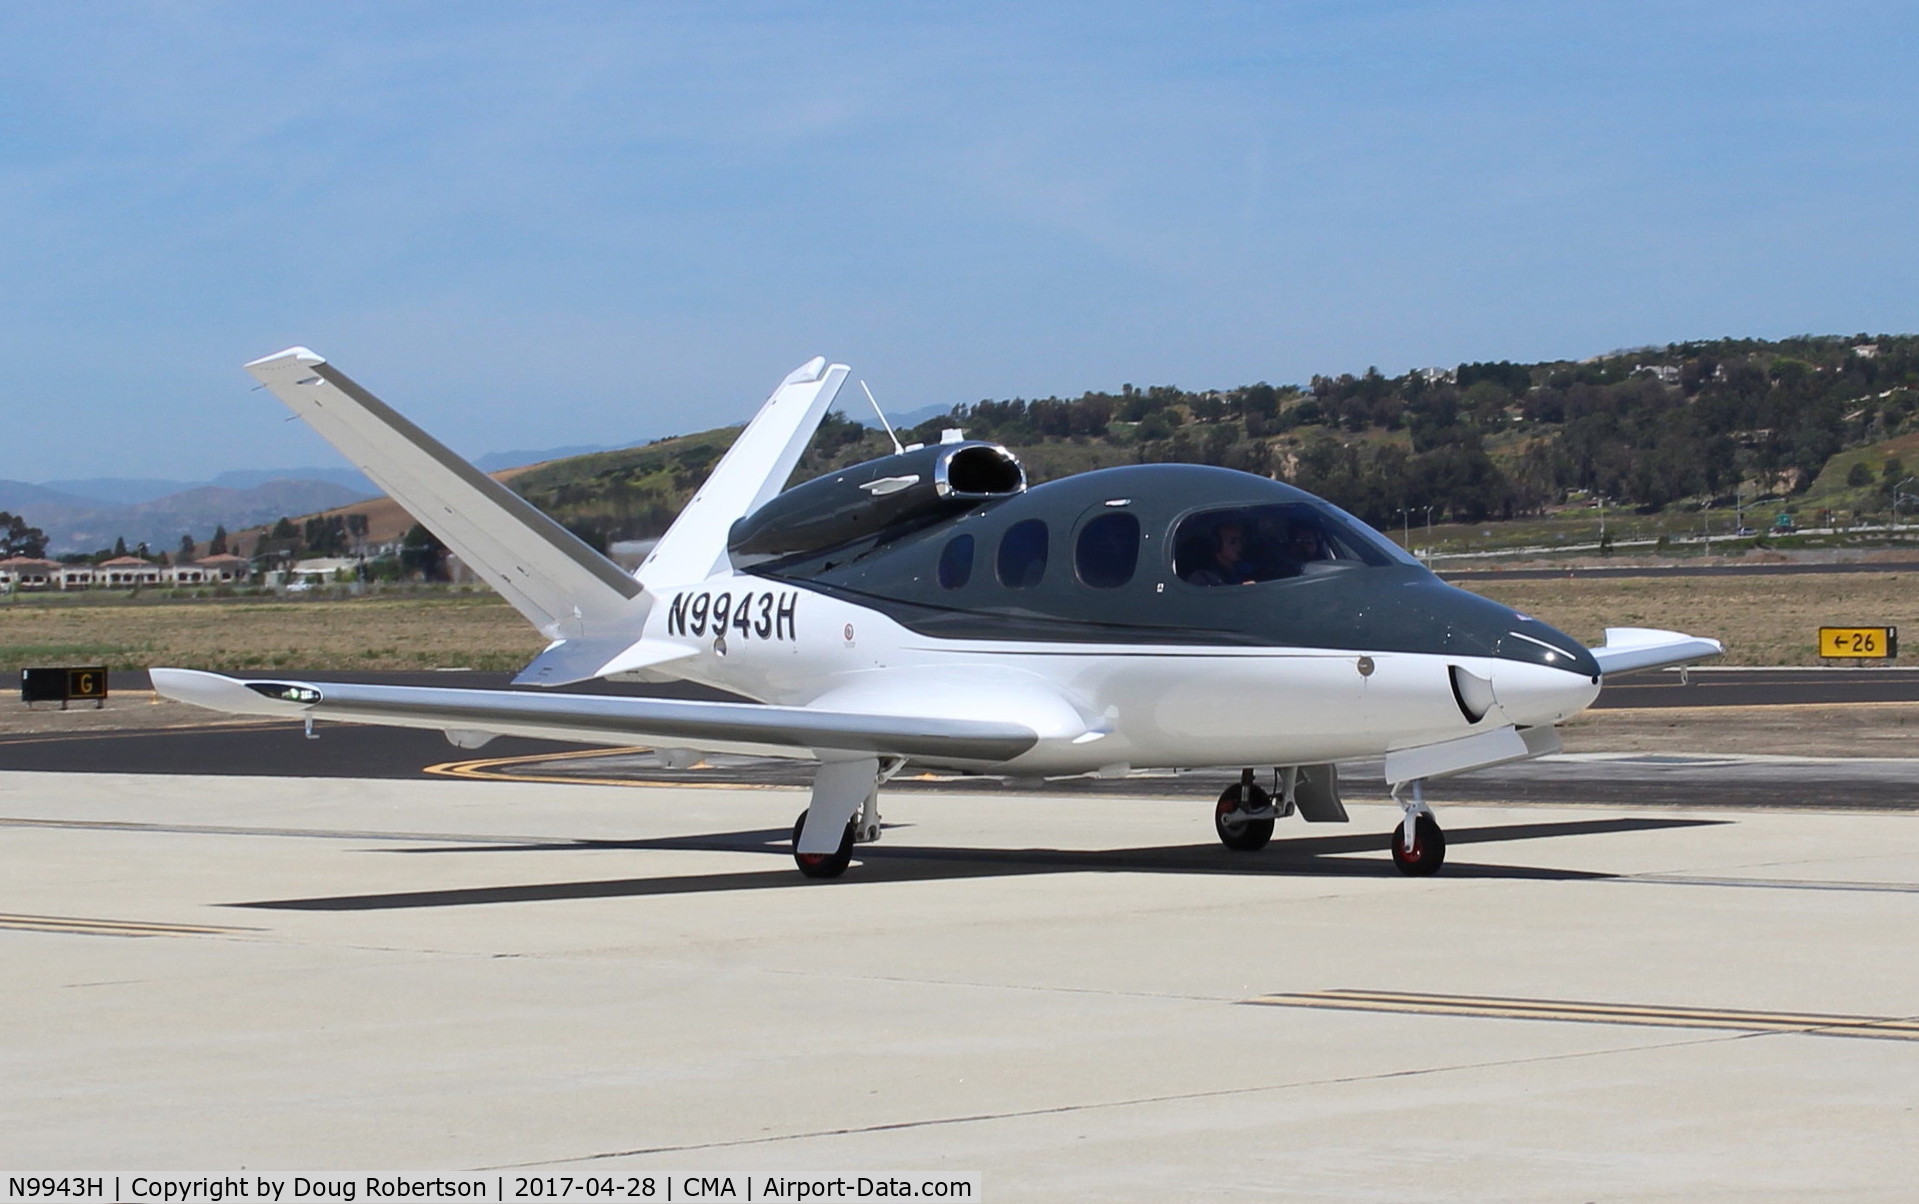 N9943H, 2016 Cirrus SF50 Vision C/N 0007, 2016 Cirrus Design Corp. VISION SF50, Williams FJ33-5A Turbofan, this is the seventh production VISION jet, taxi at AOPA FLY-IN